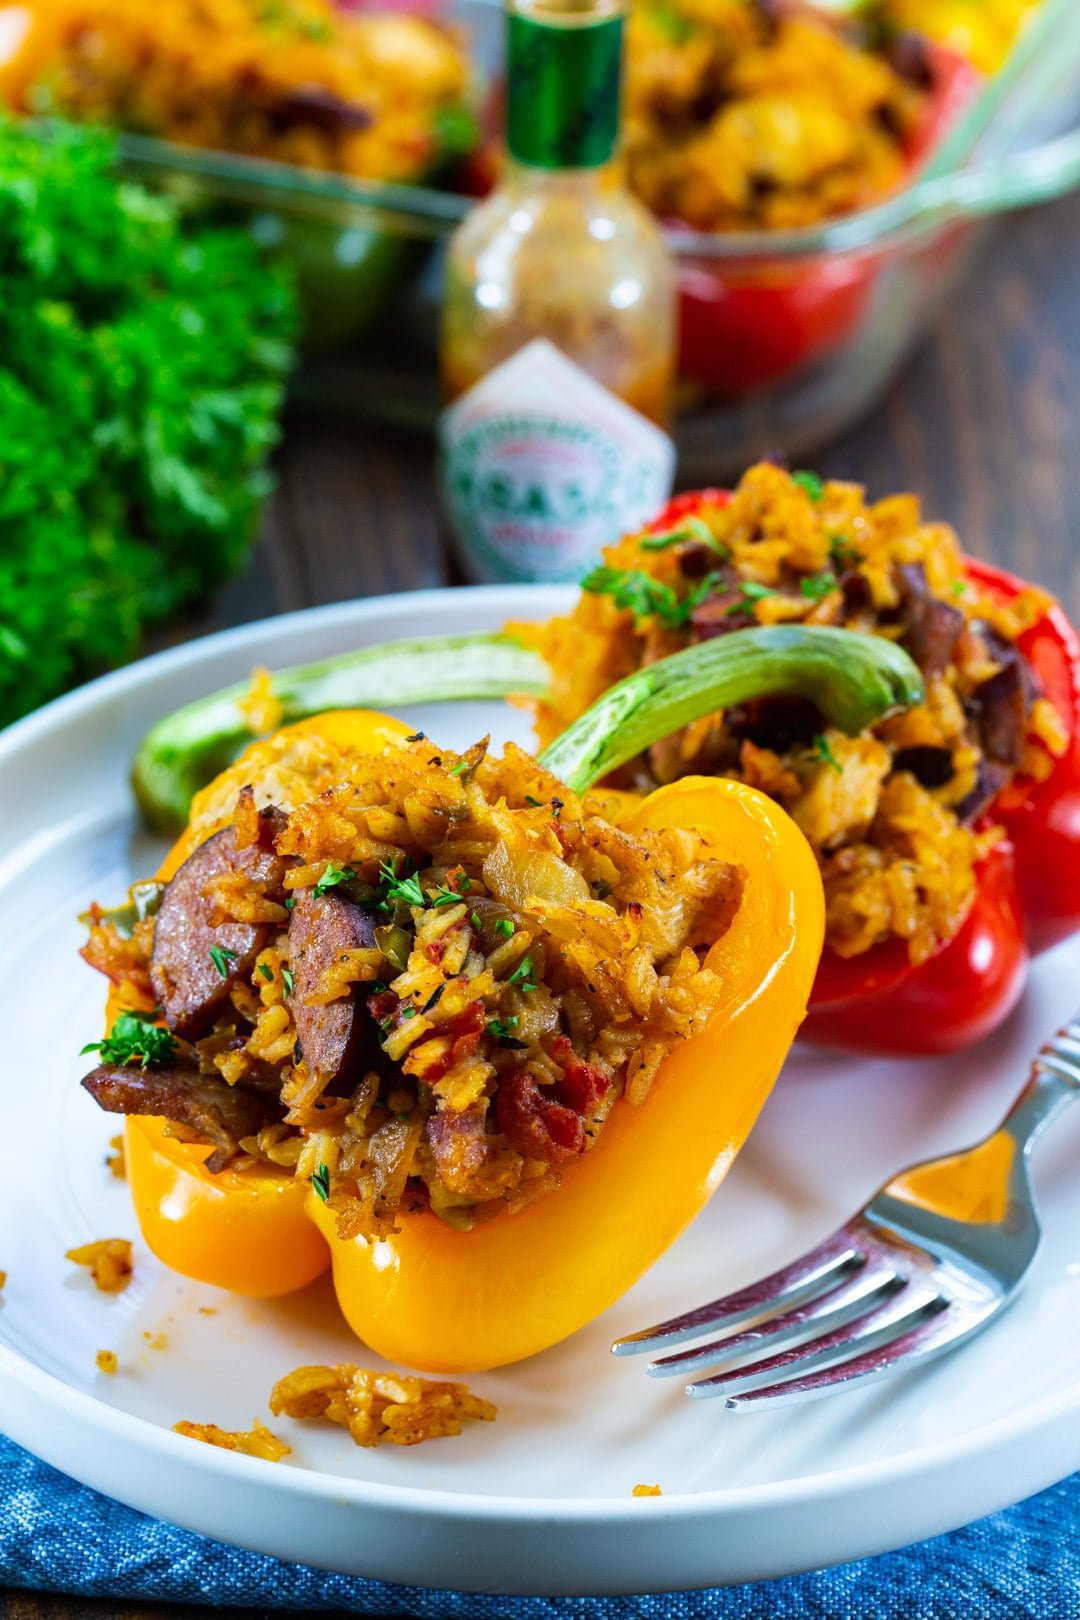 Two stuffed peppers on a plate.